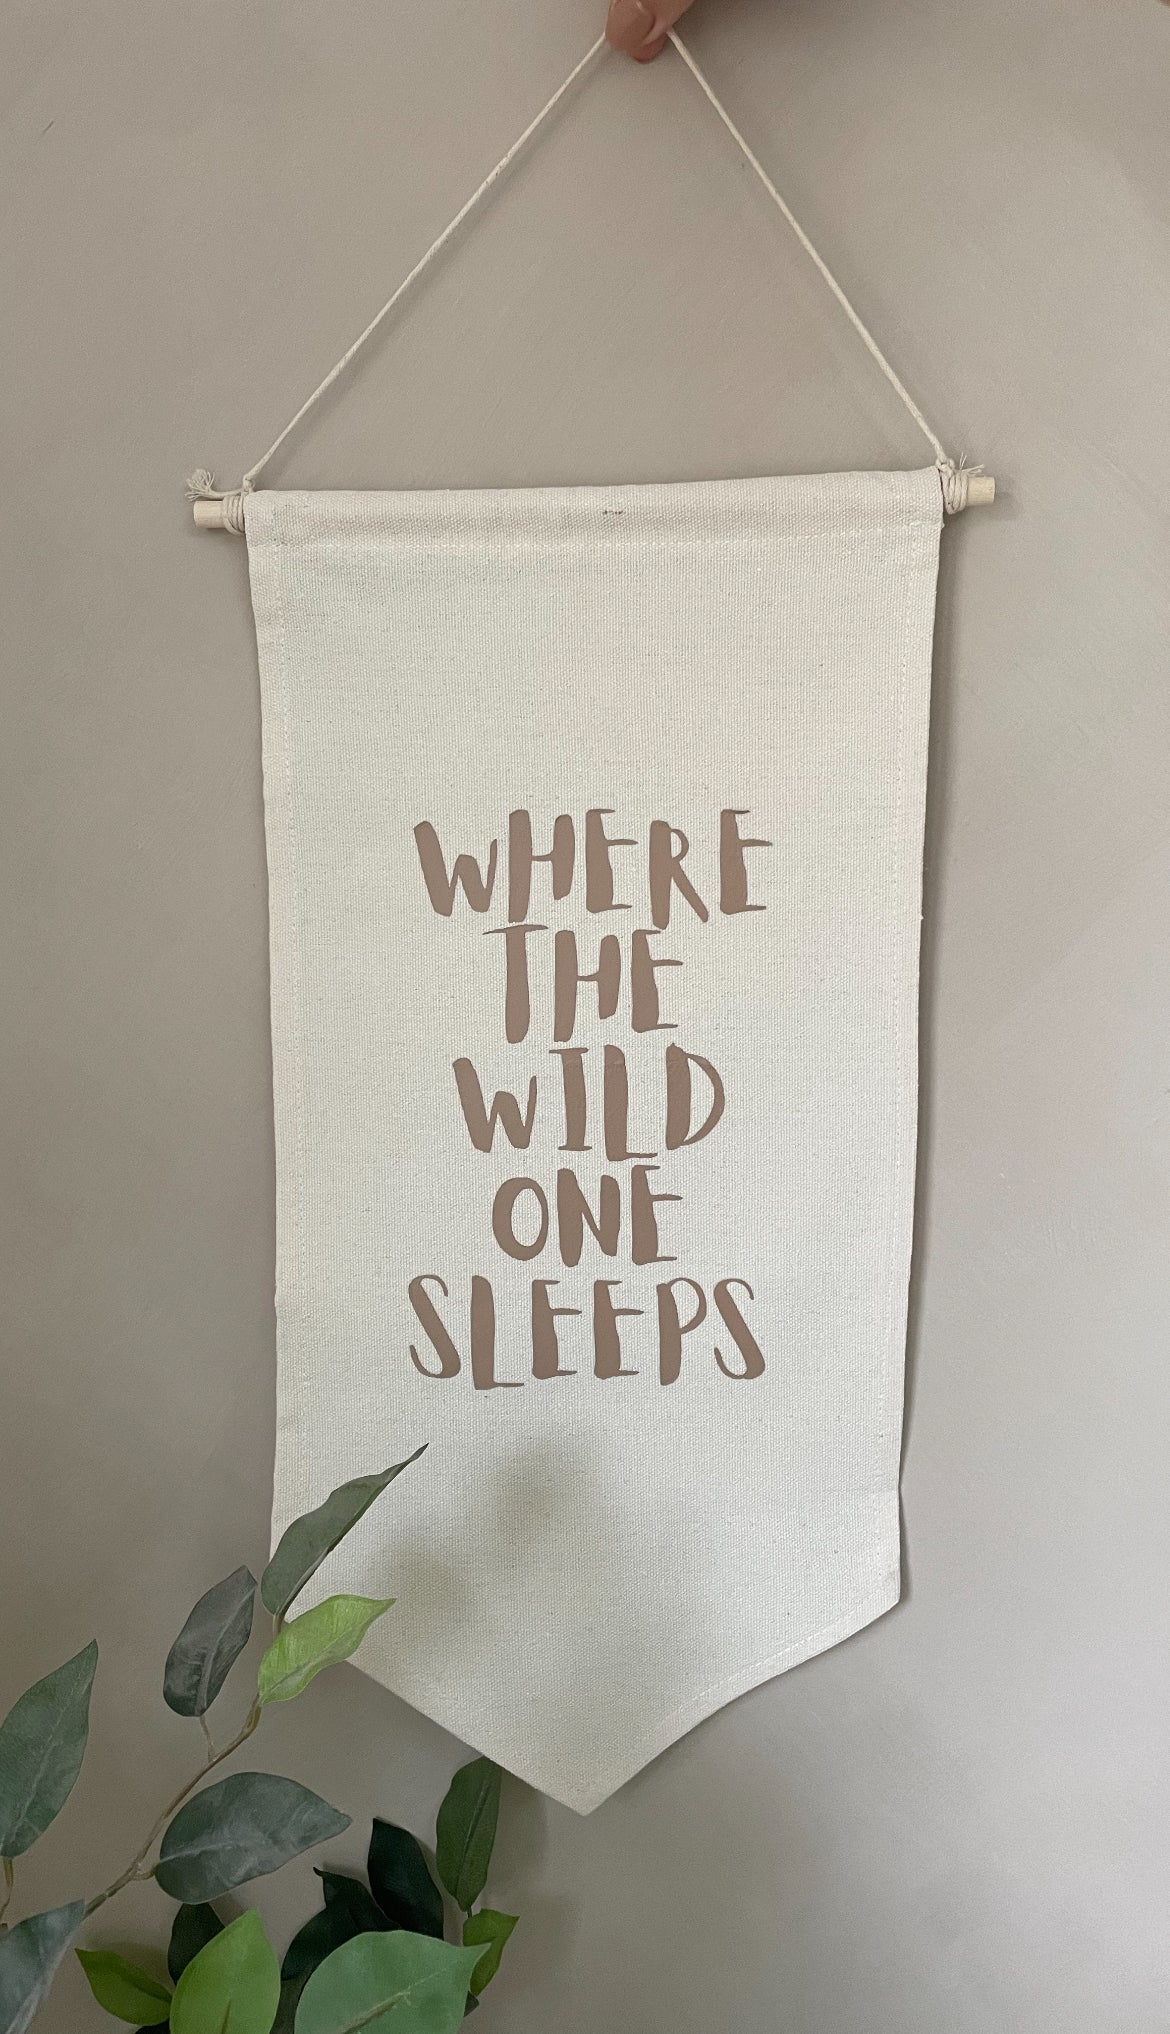 cotton wall hanging where the wild one sleeps